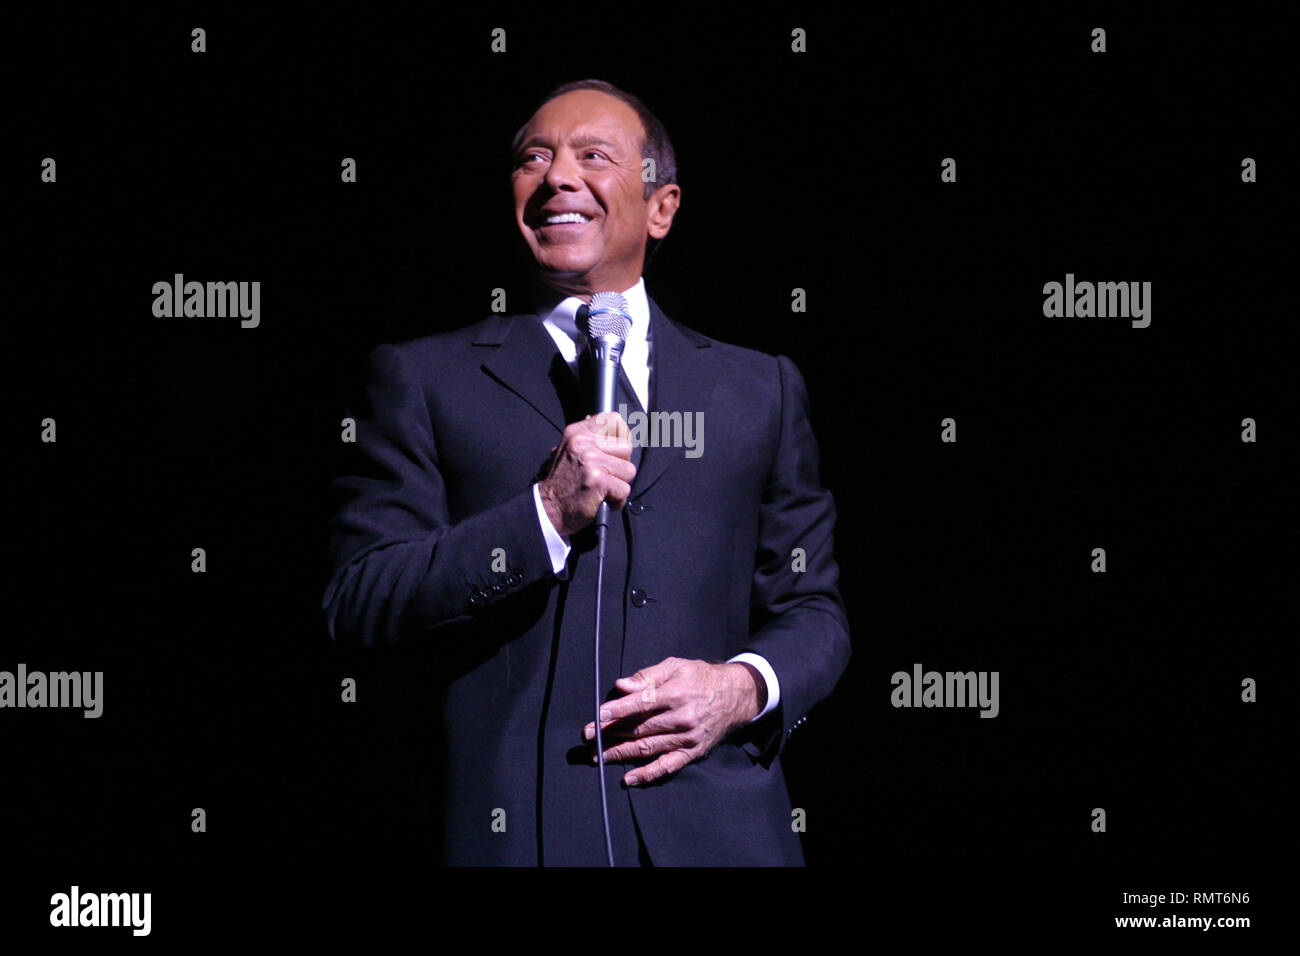 SInger Paul Anka is shown during a 'live' concert appearance. Stock Photo